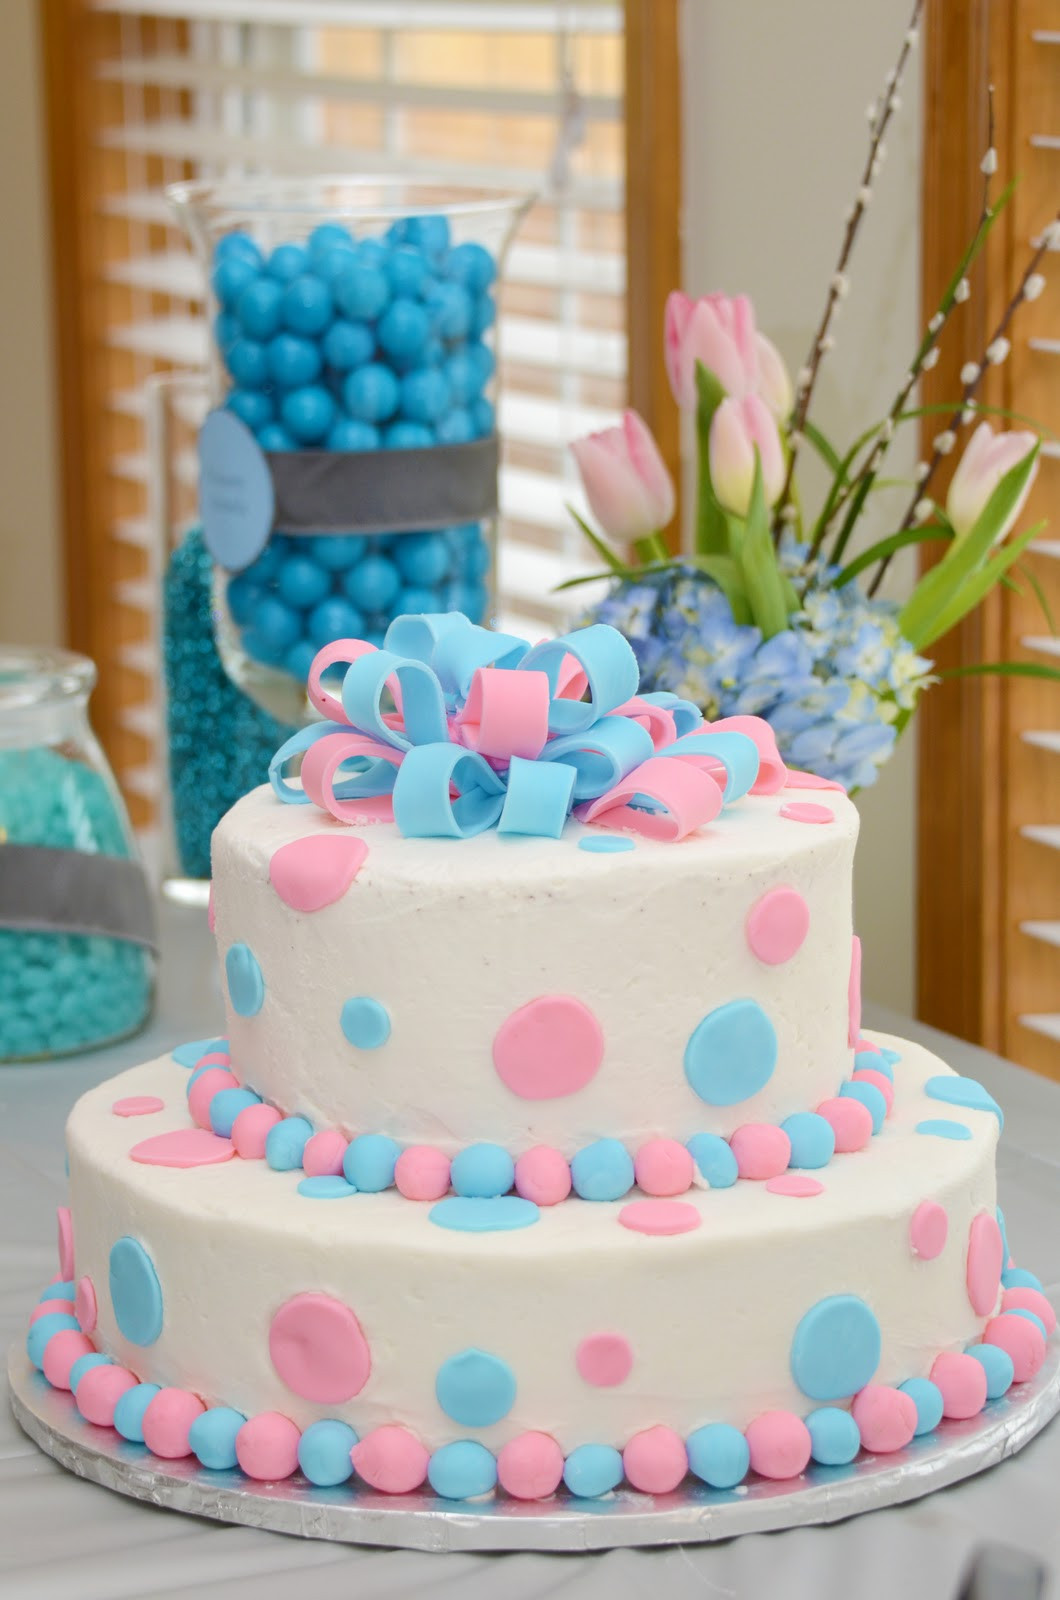 Cake Ideas For Gender Reveal Party
 Vernon Volumes Baby Goble s Gender Reveal Party